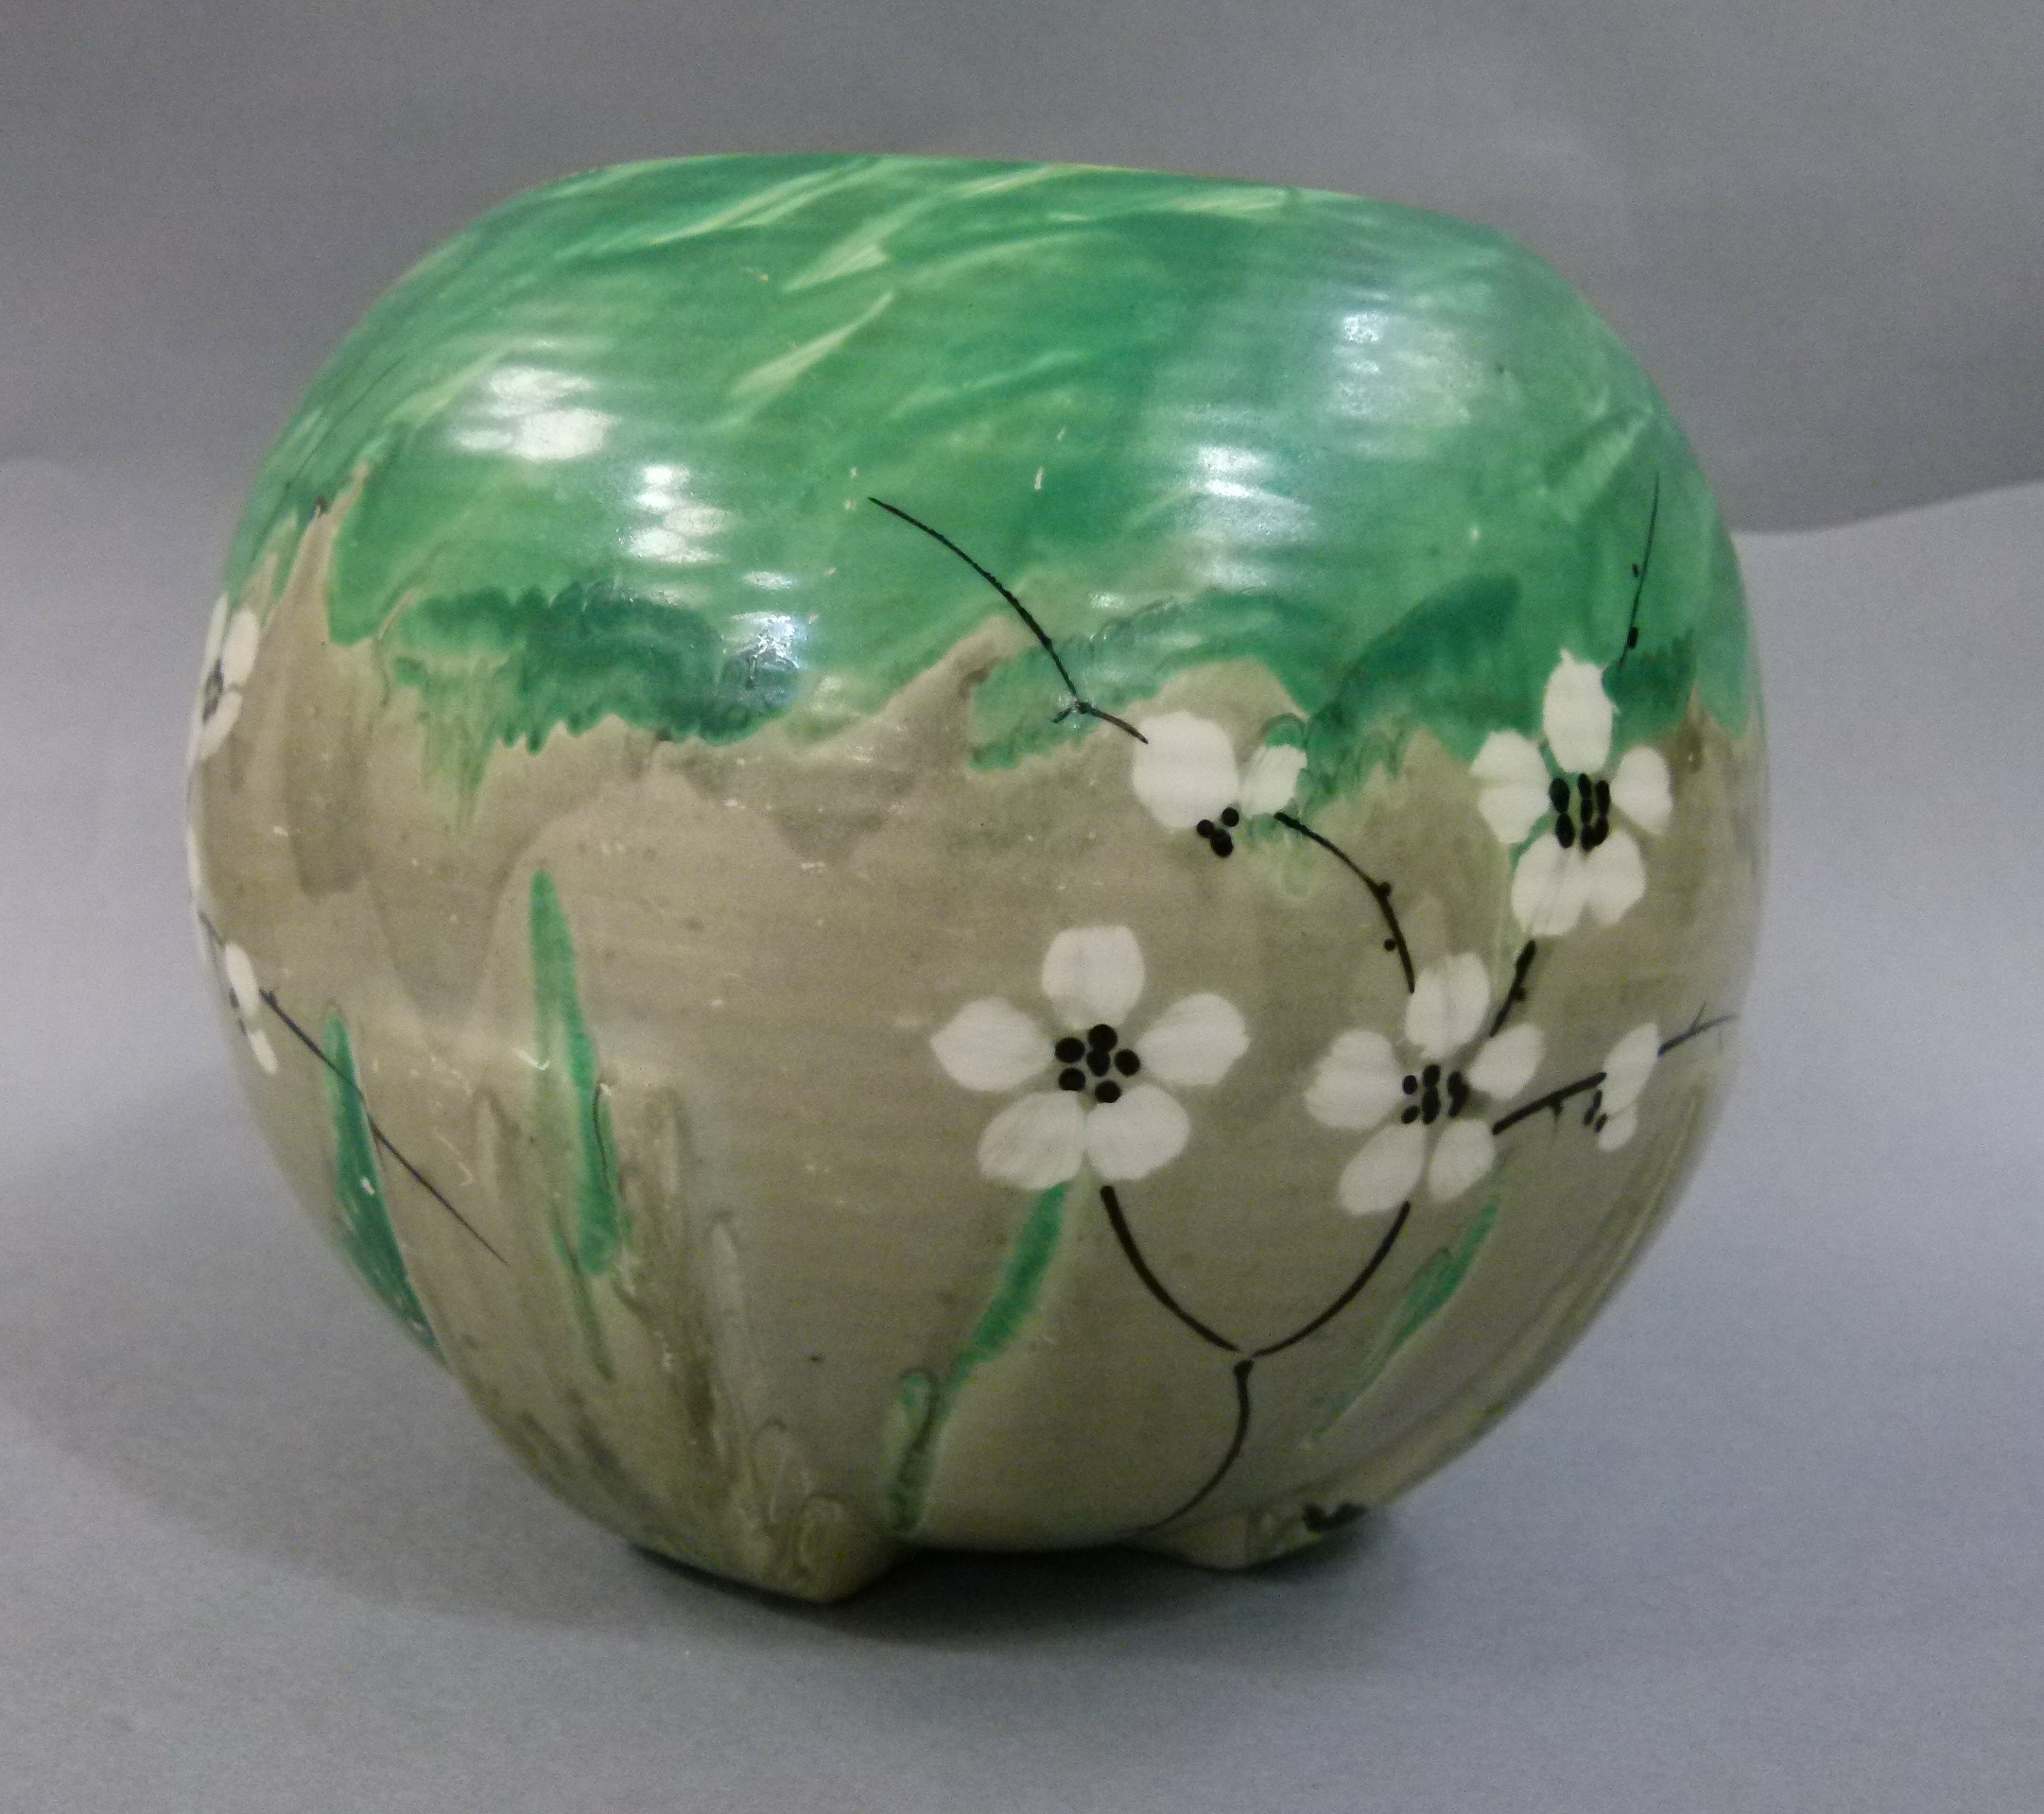 A Myott and Sons globular vase, moulded with rectangular fins from the base and enamelled in